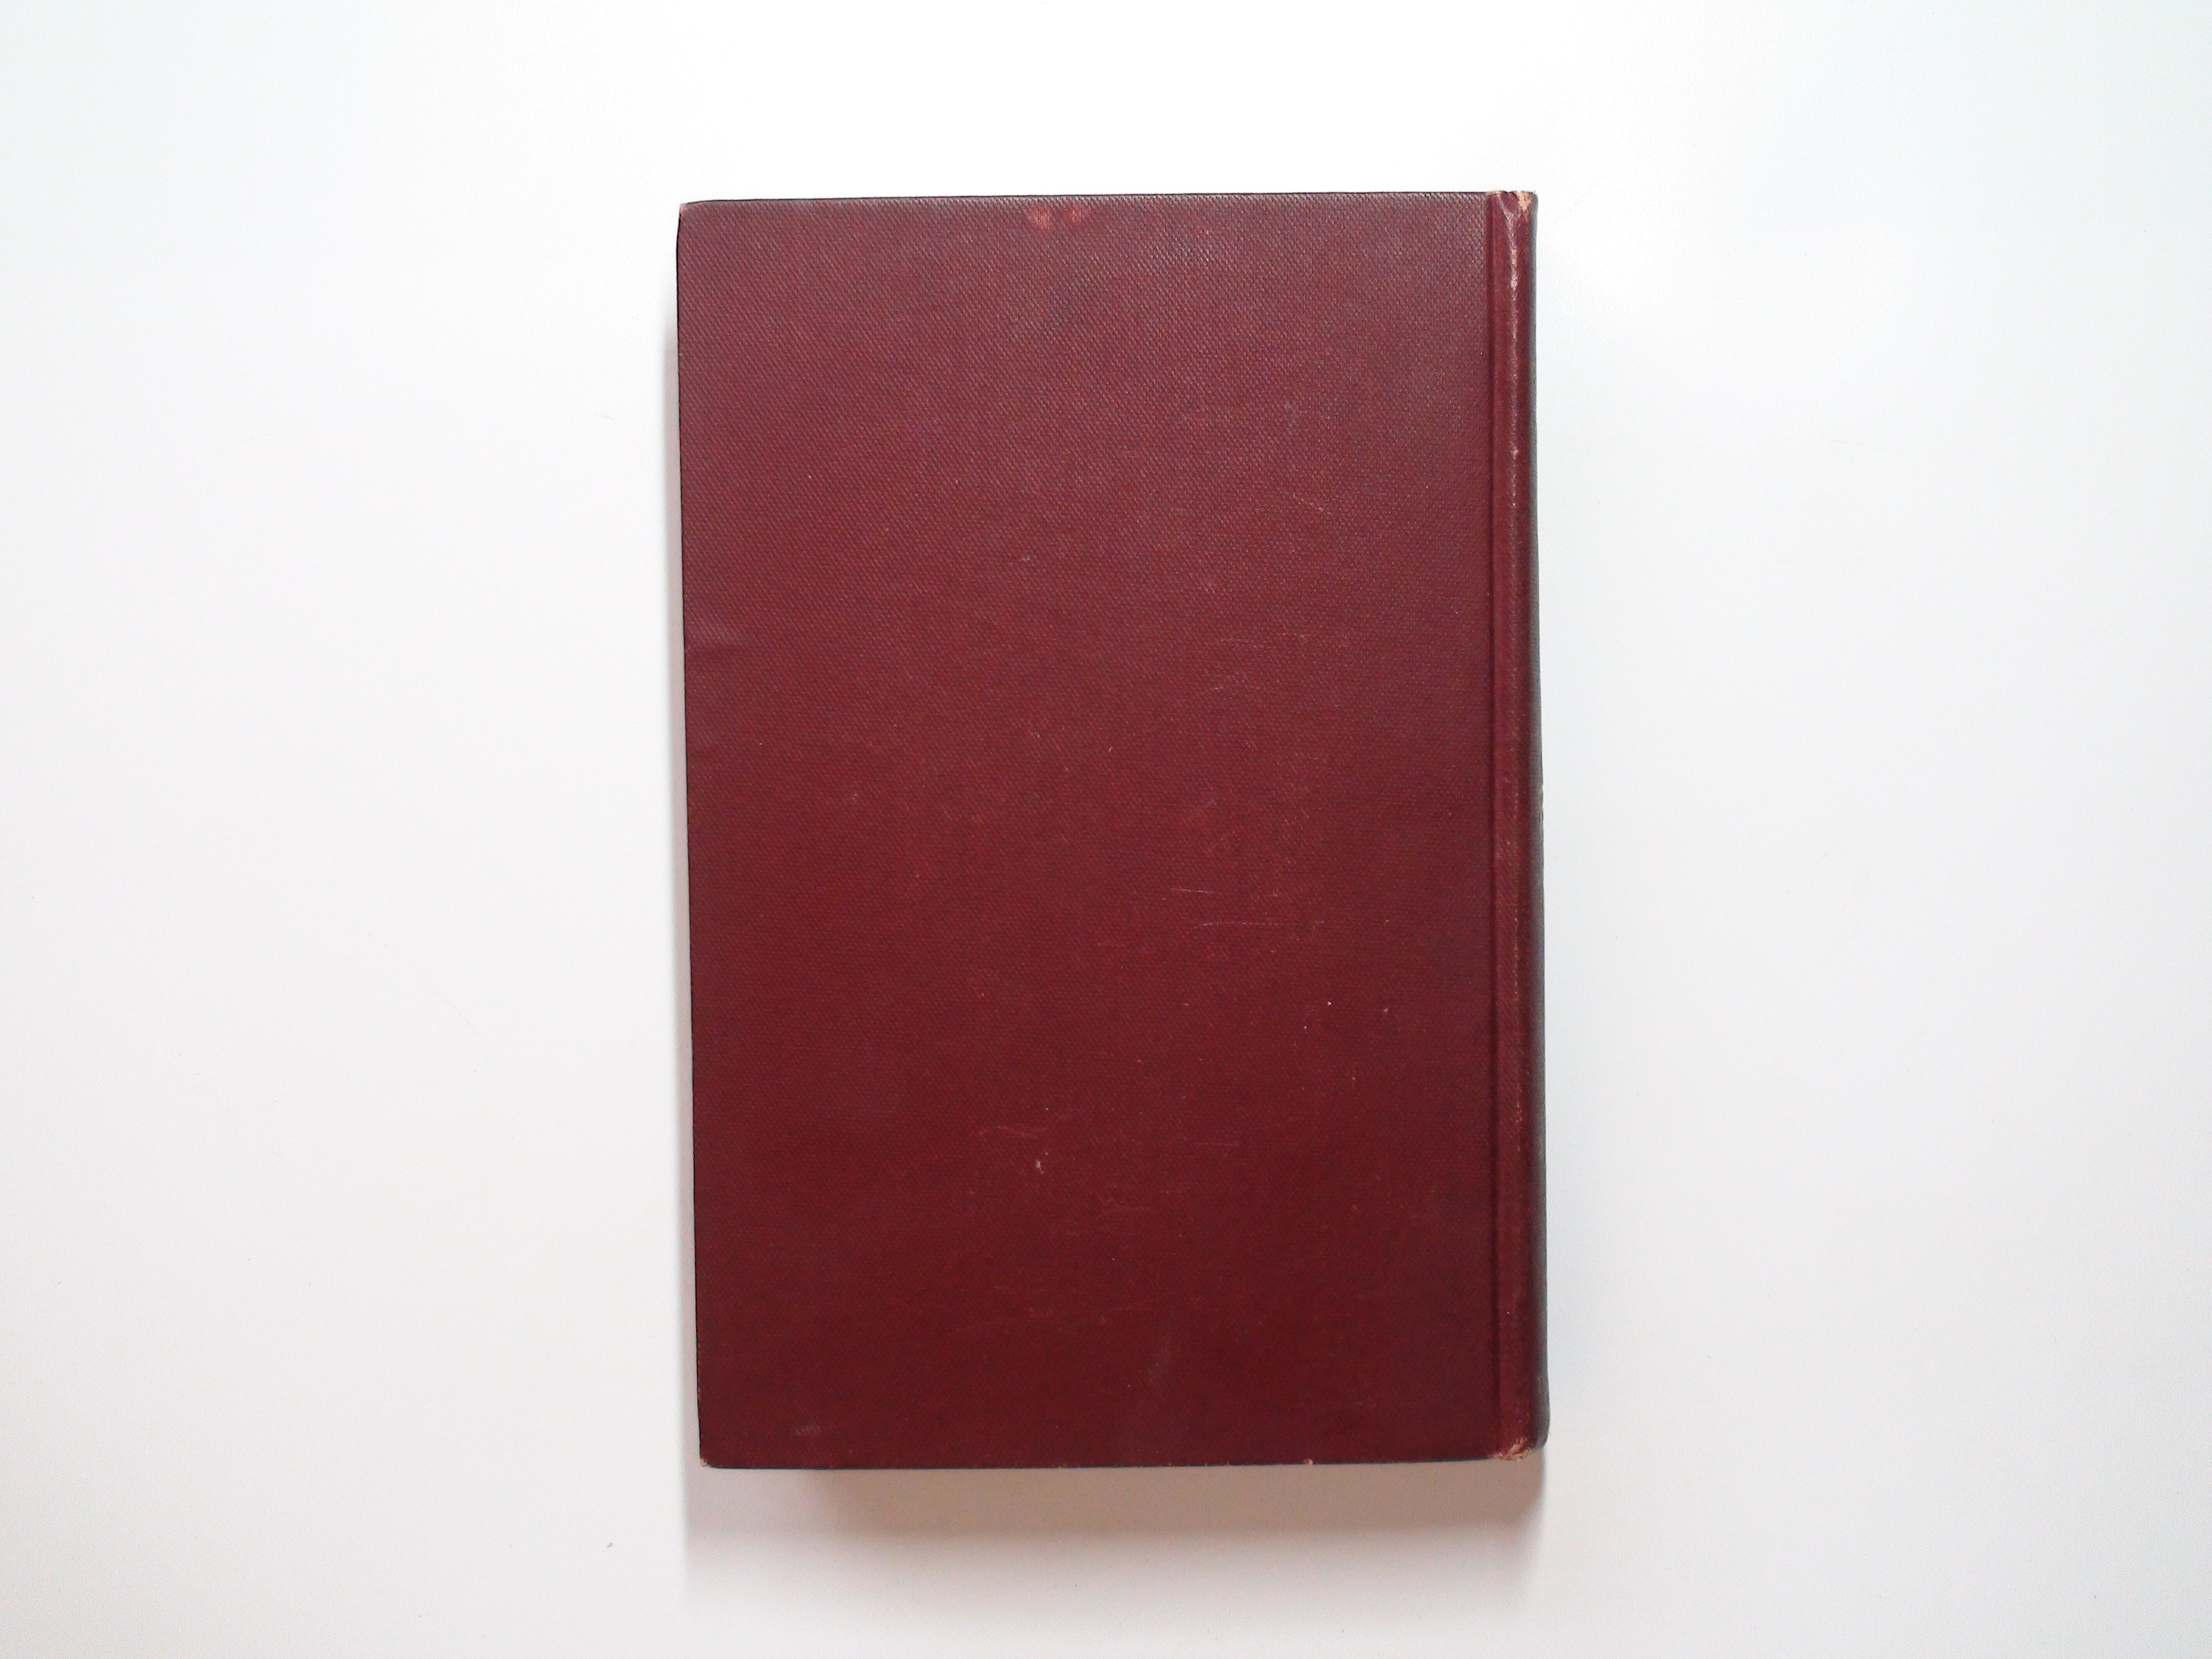 Early Poems of James Russell Lowell with a Biographical Sketch, 1892